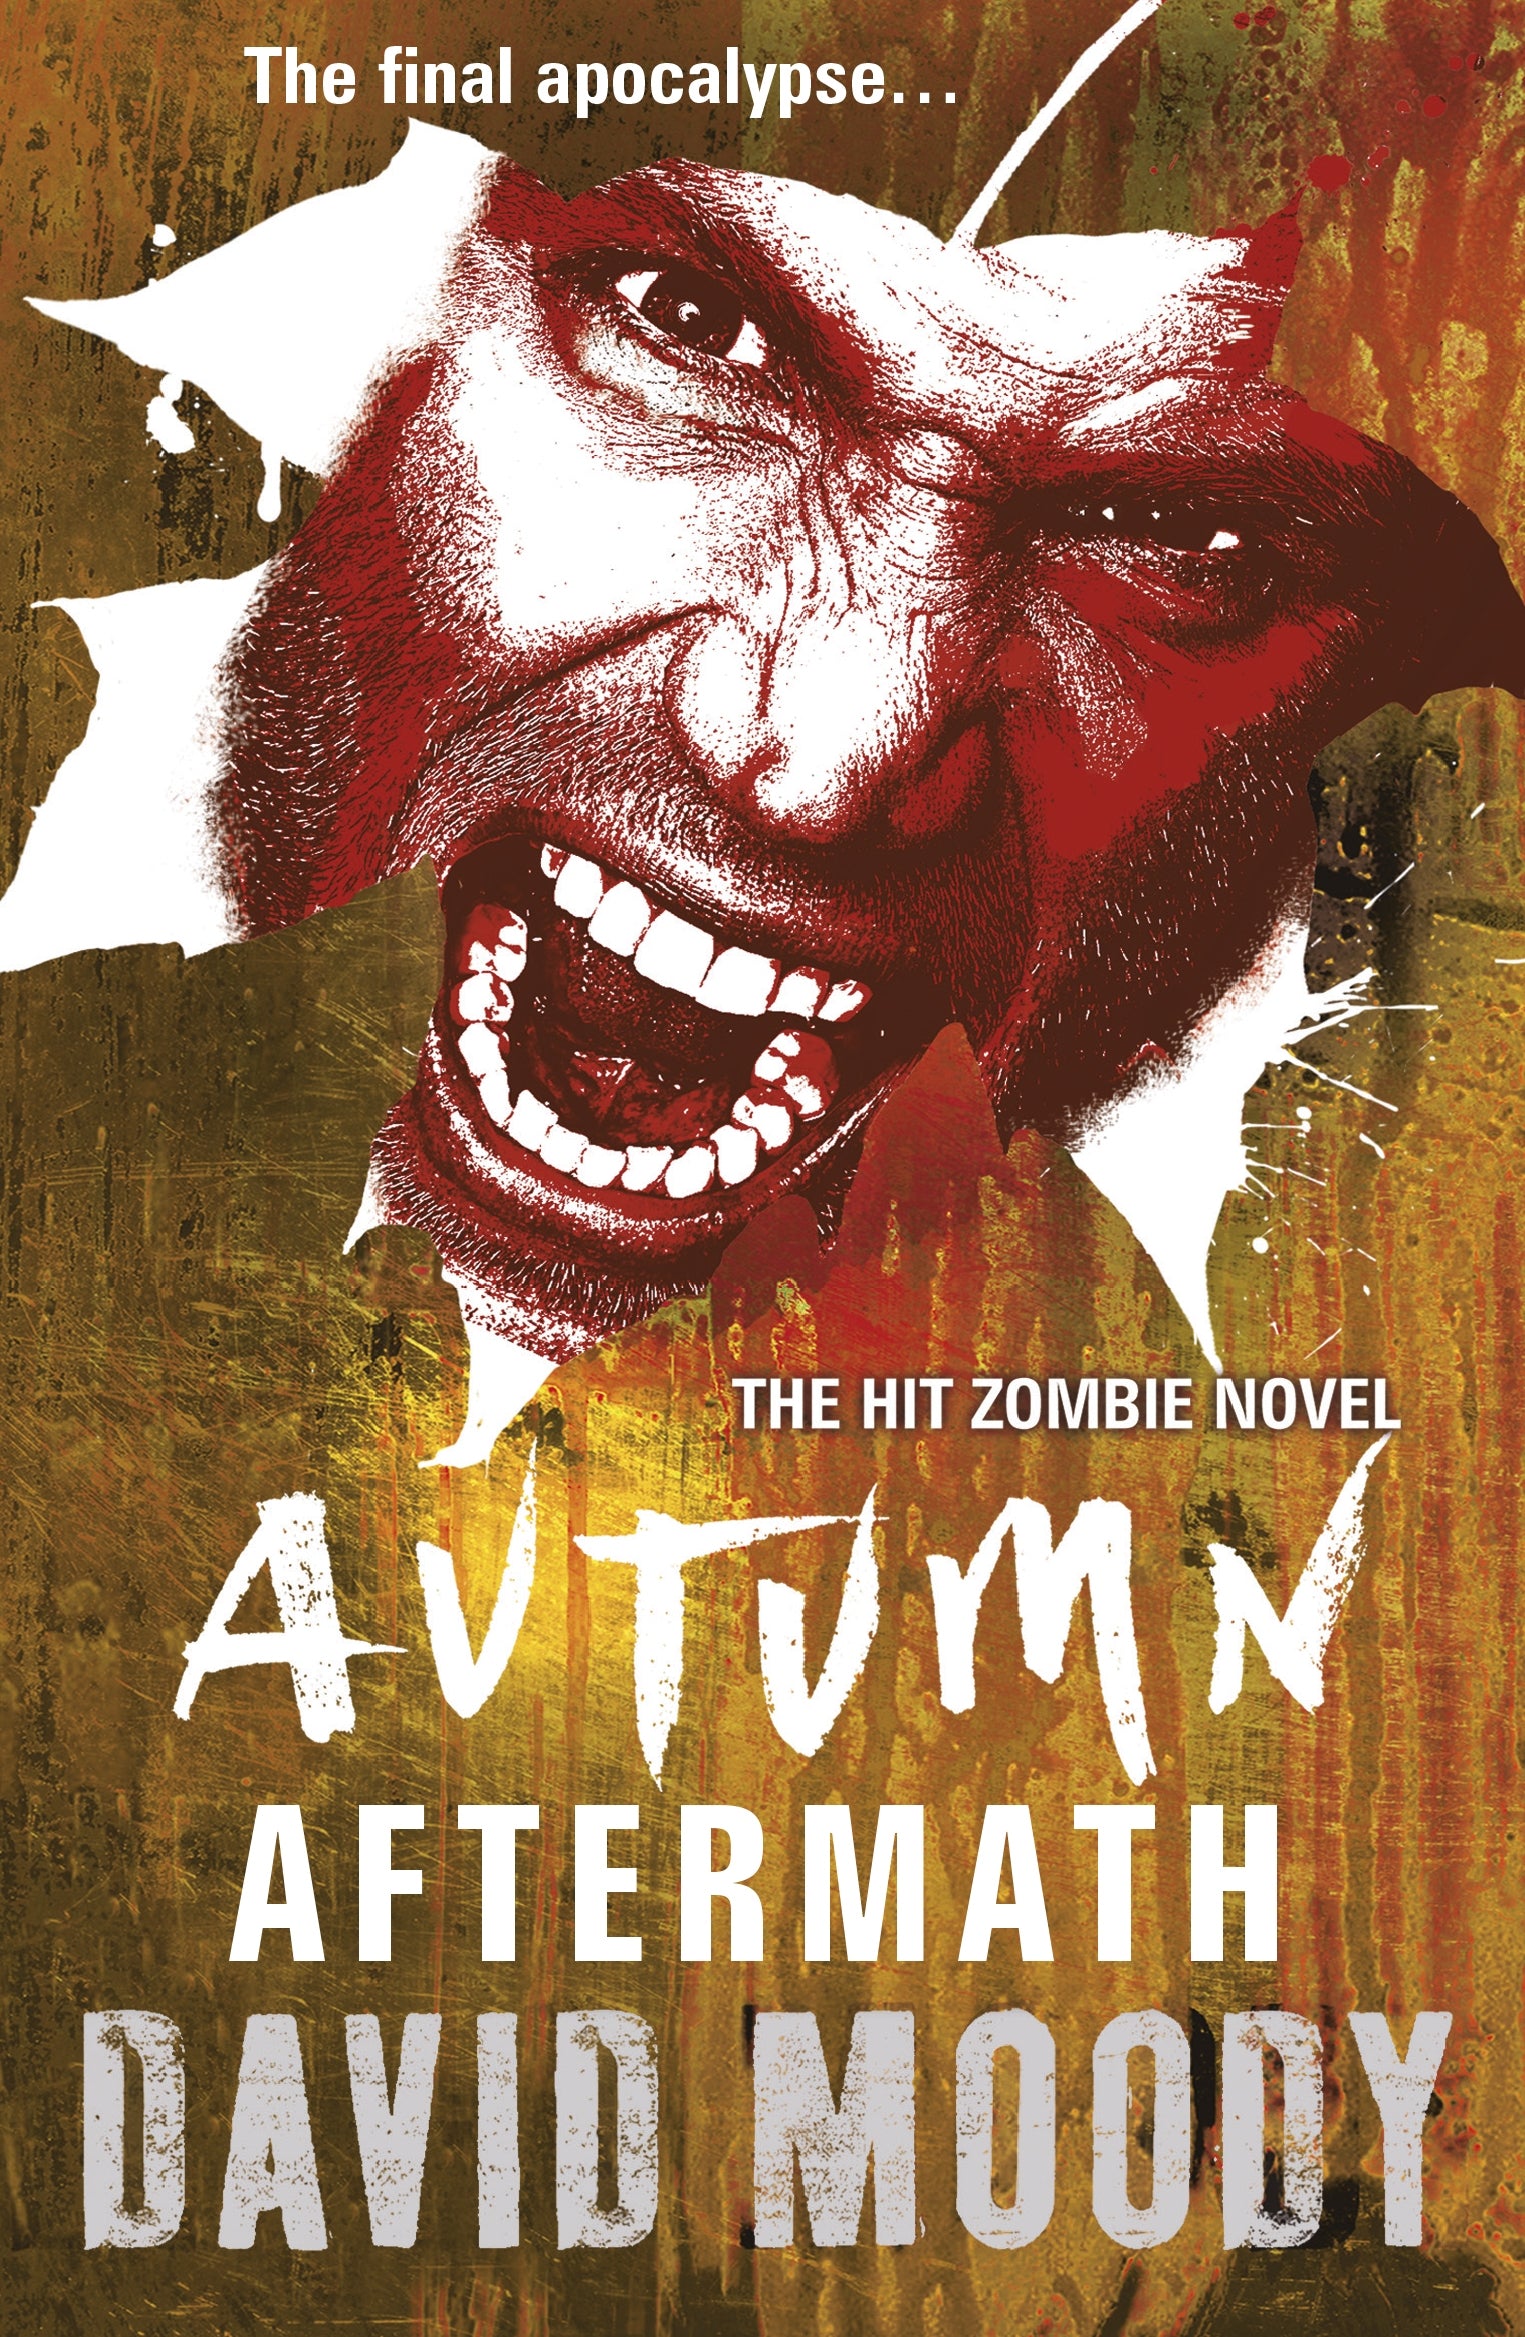 Autumn: Aftermath by David Moody